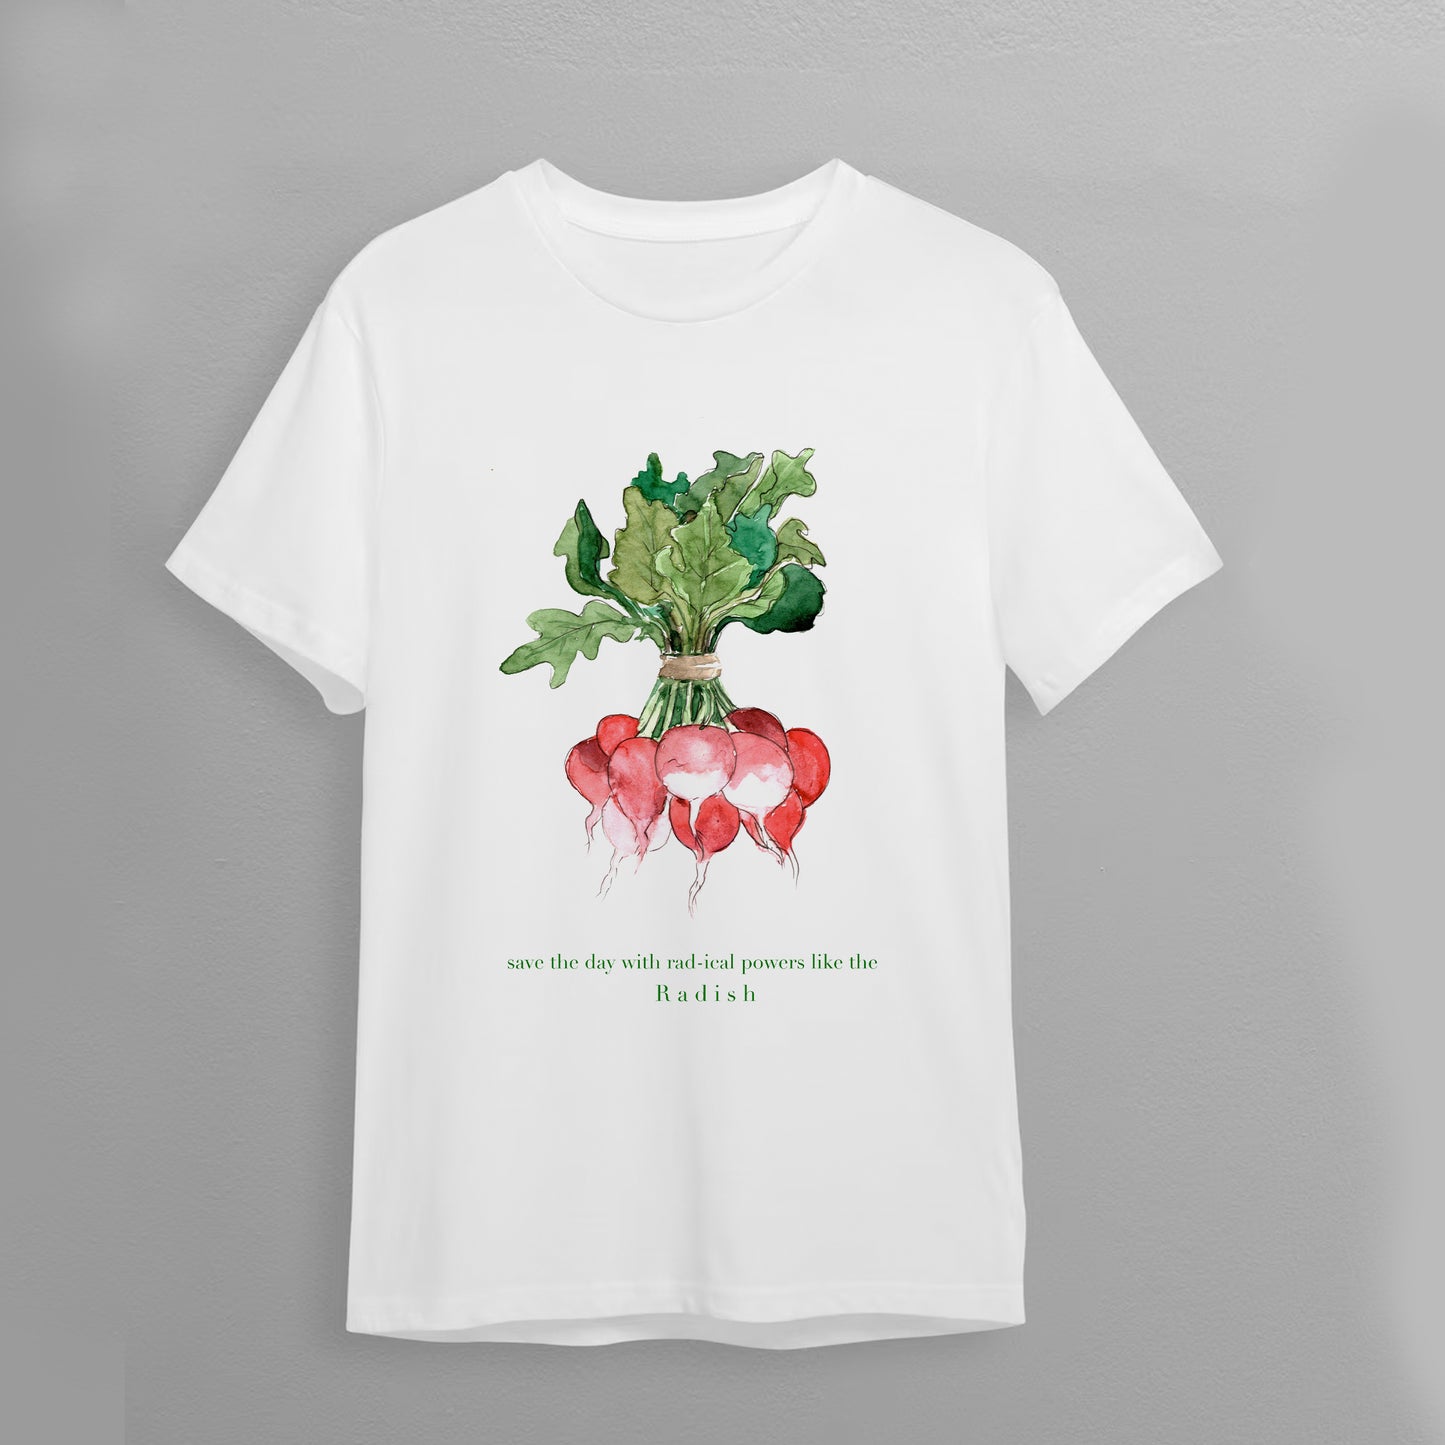 T-Shirt "Save the day with rad-ical powers like the radish"